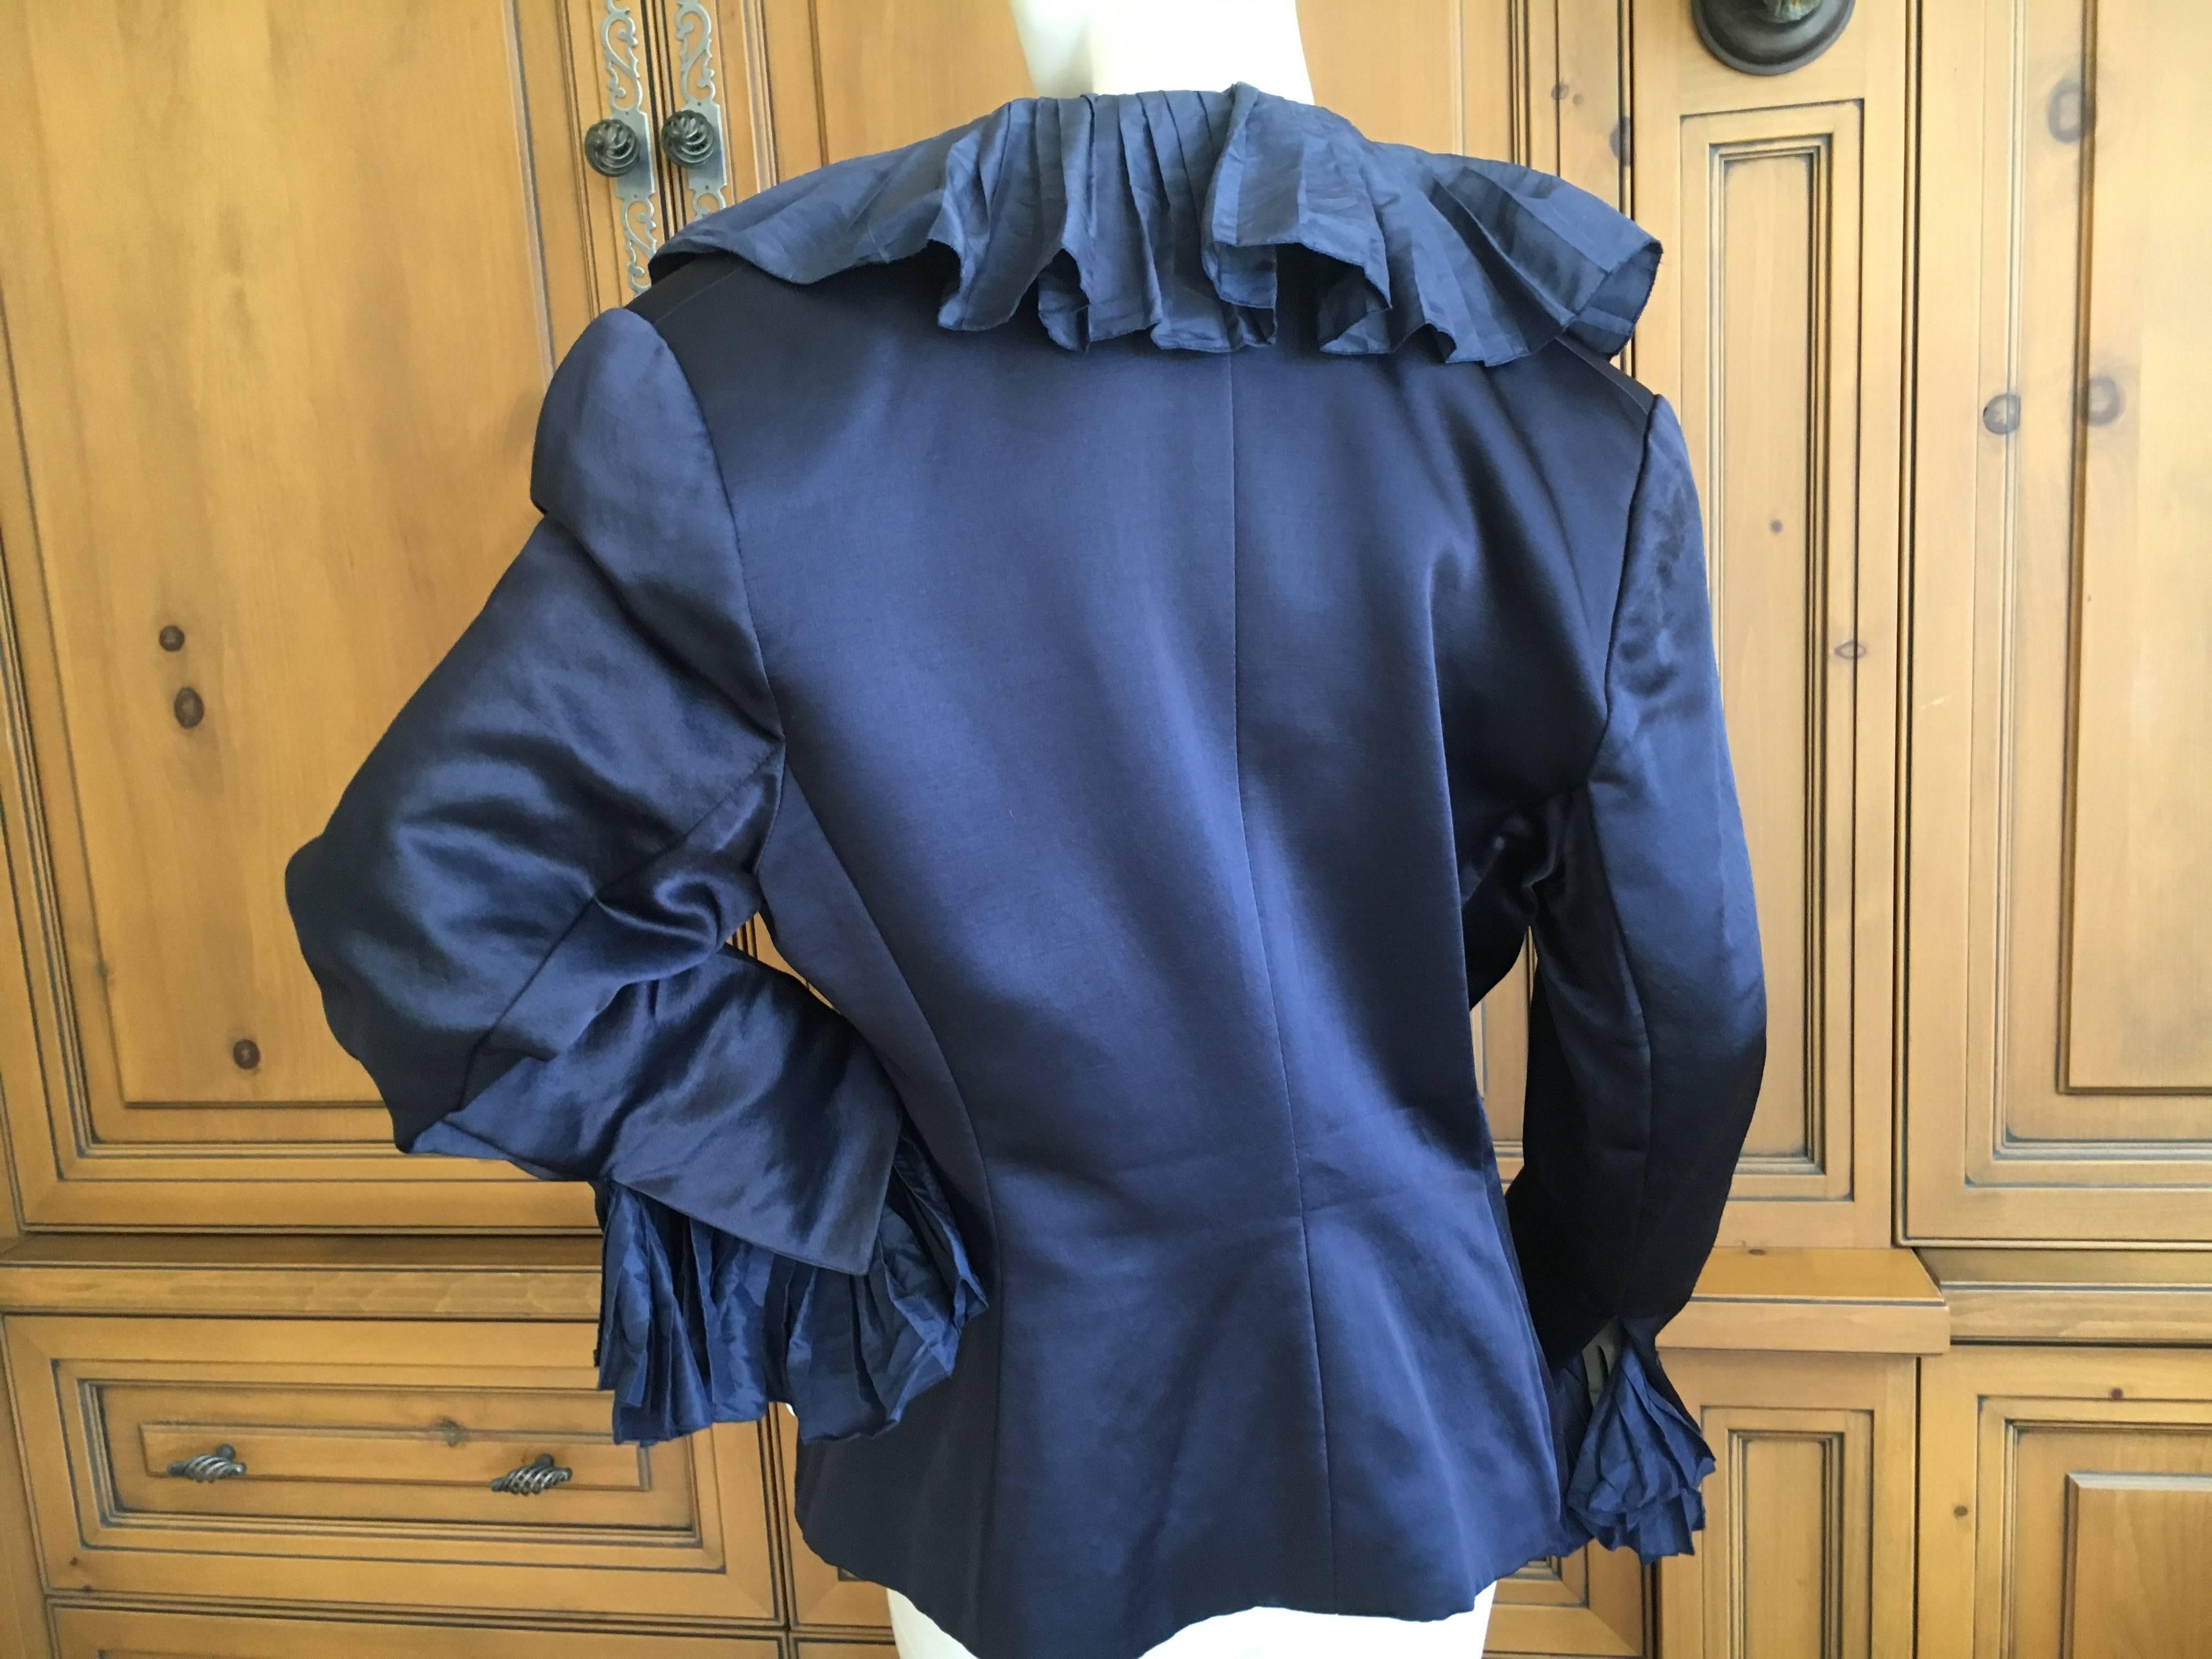 Christian Dior Numbered Demi Couture Ruffled Silk Jacket by Gianfranco Ferre XL For Sale 2